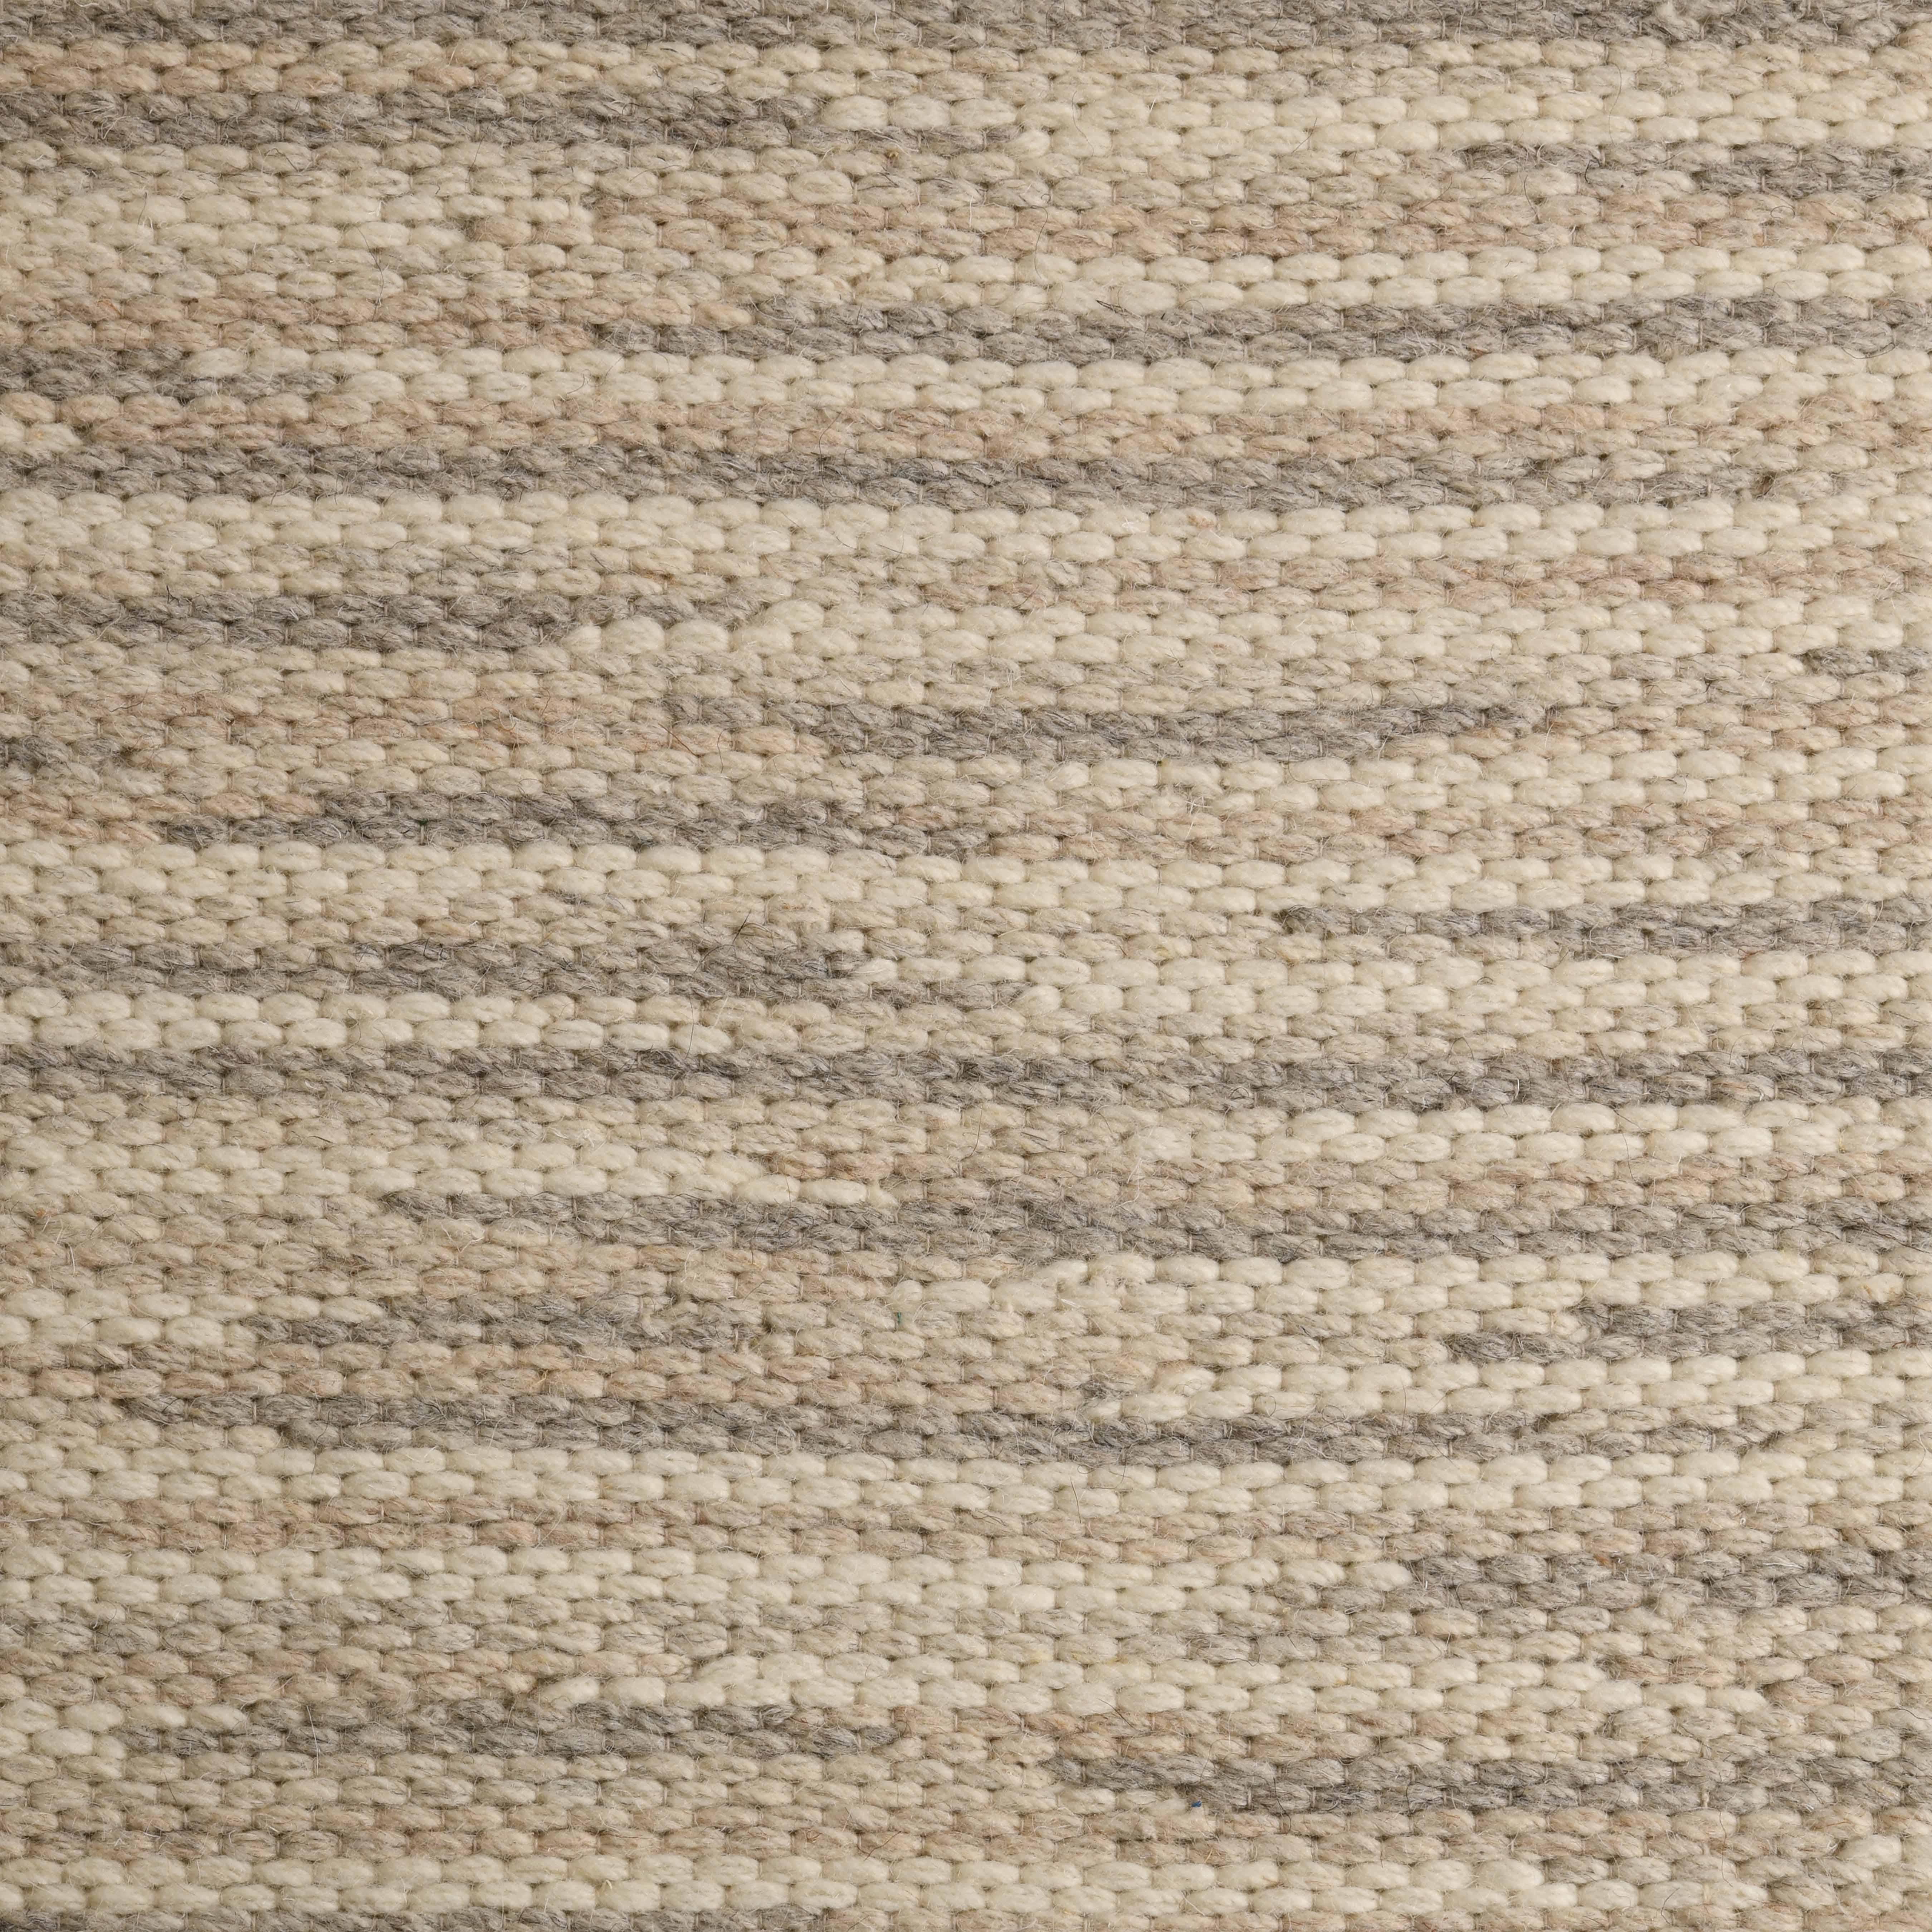 Rivus, Stone, Handwoven Face 60% Undyed NZ Wool, 40% Undyed MED Wool, 8' x 10' For Sale